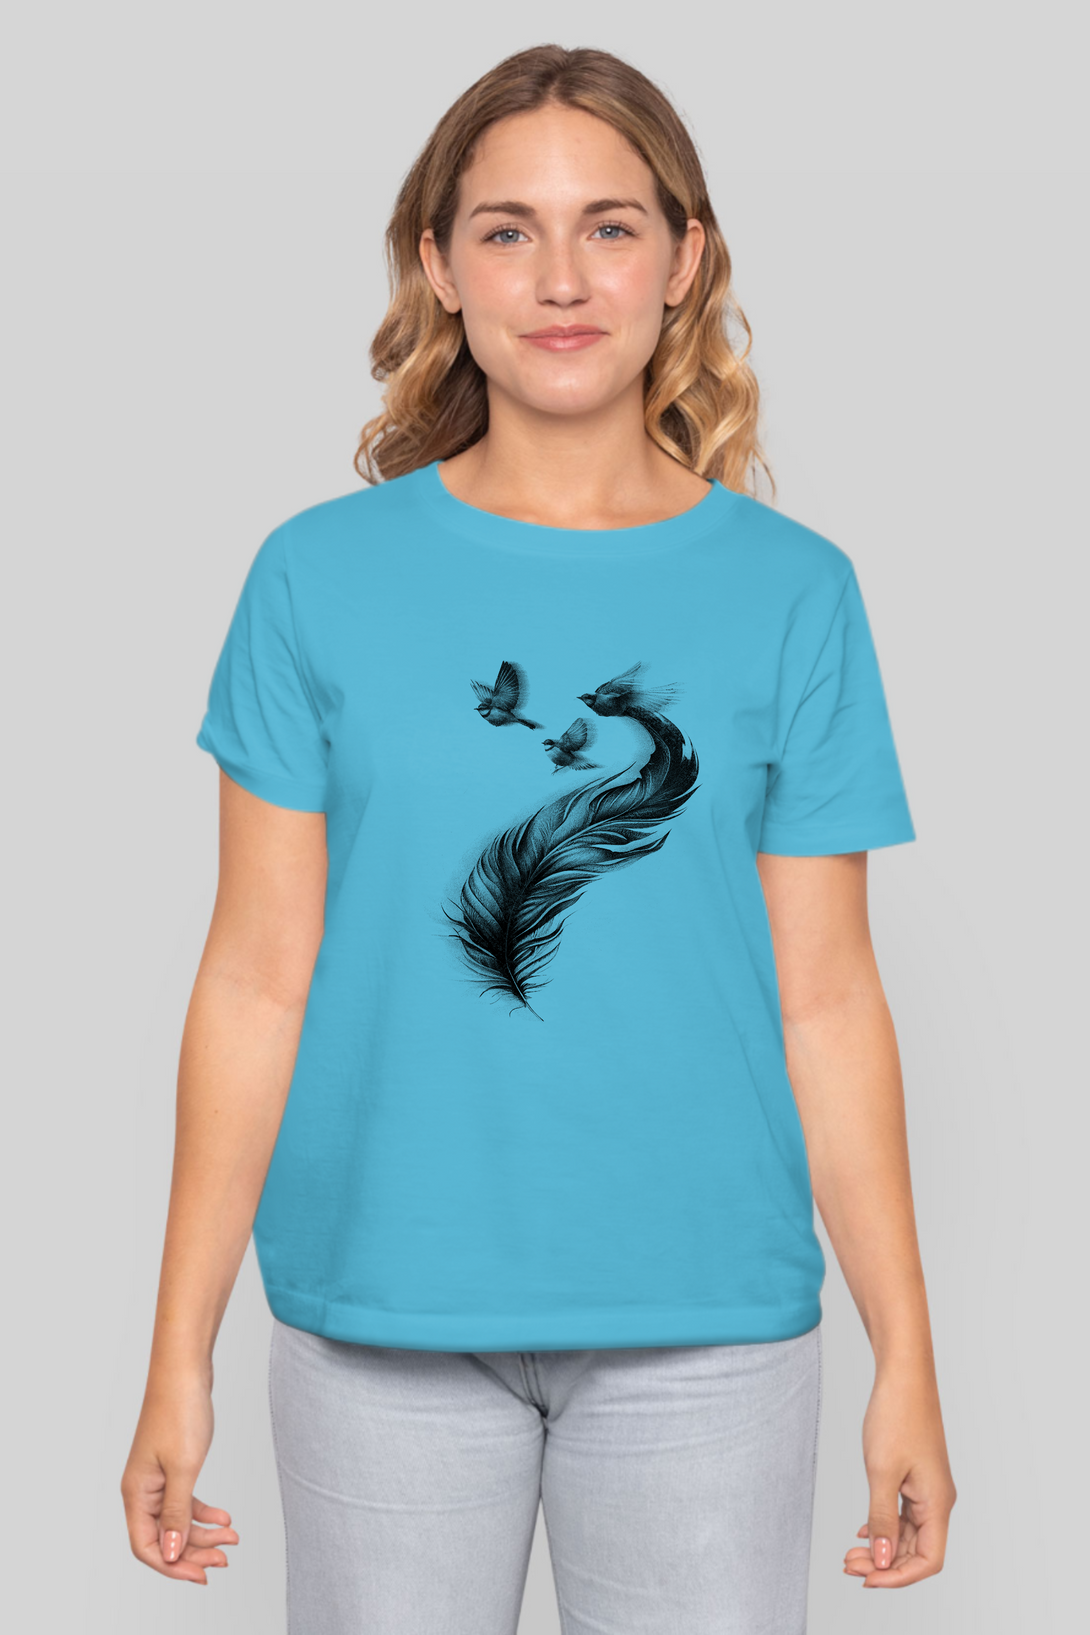 Feather With Birds Printed T-Shirt For Women - WowWaves - 9